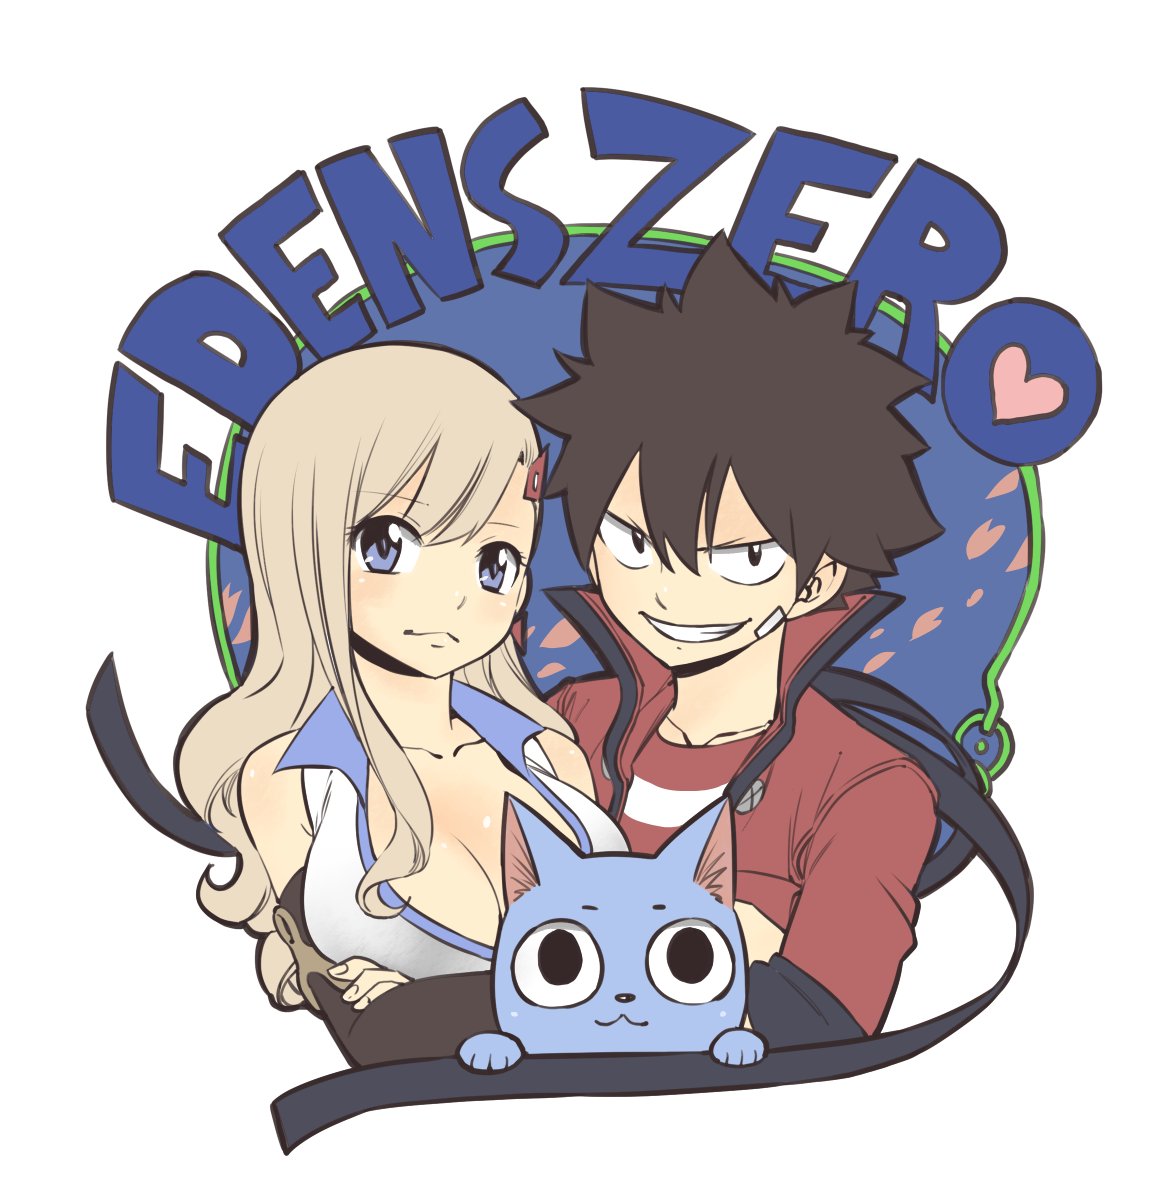 Manga Artist Hiro Mashima Is Teaming Up With Square Enix For A Totally New  RPG